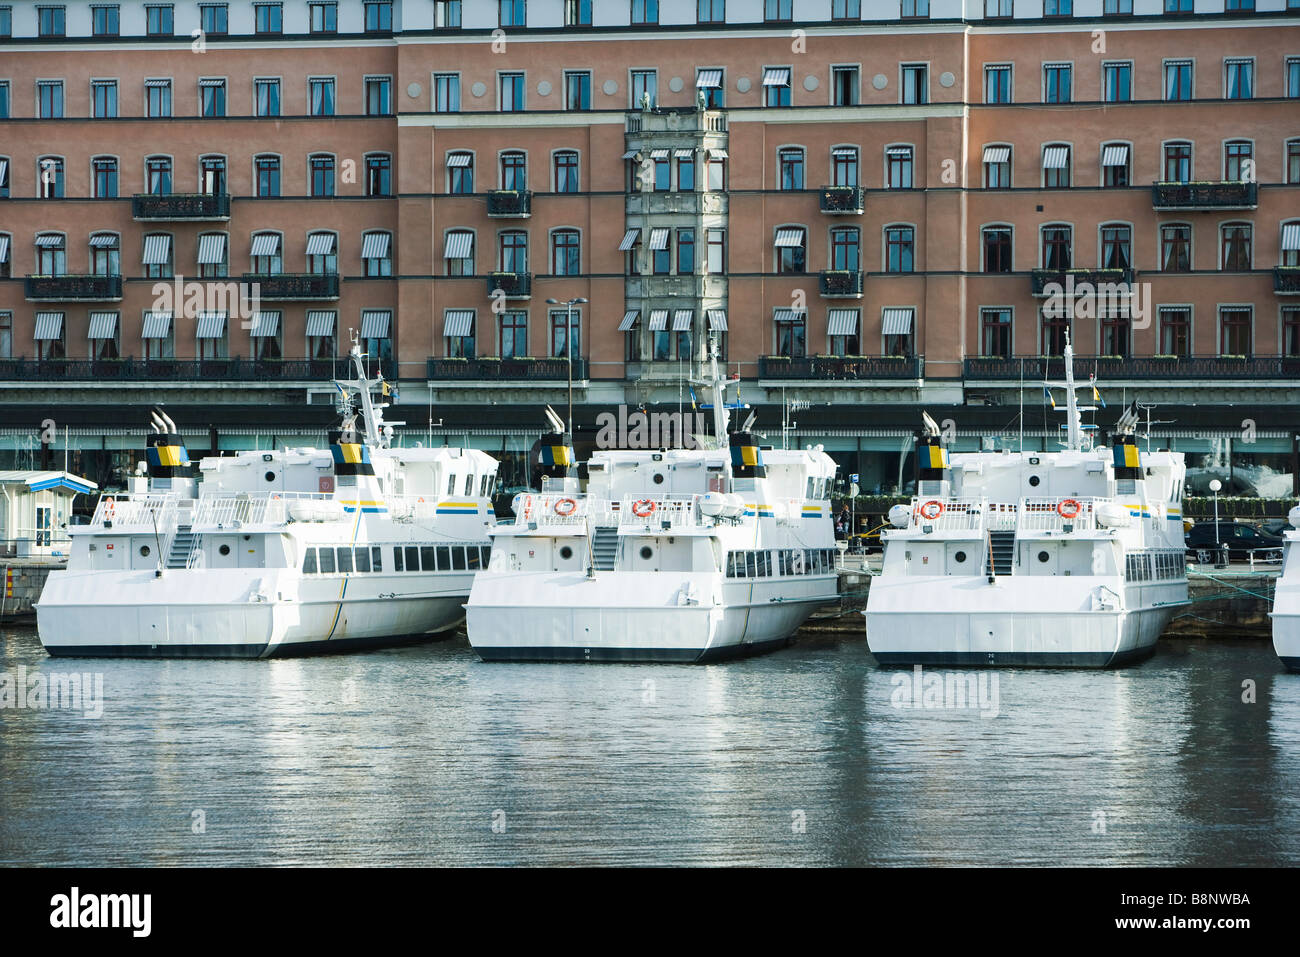 Sweden, Stockholm, yachts docked in canal front of apartment buildings Stock Photo